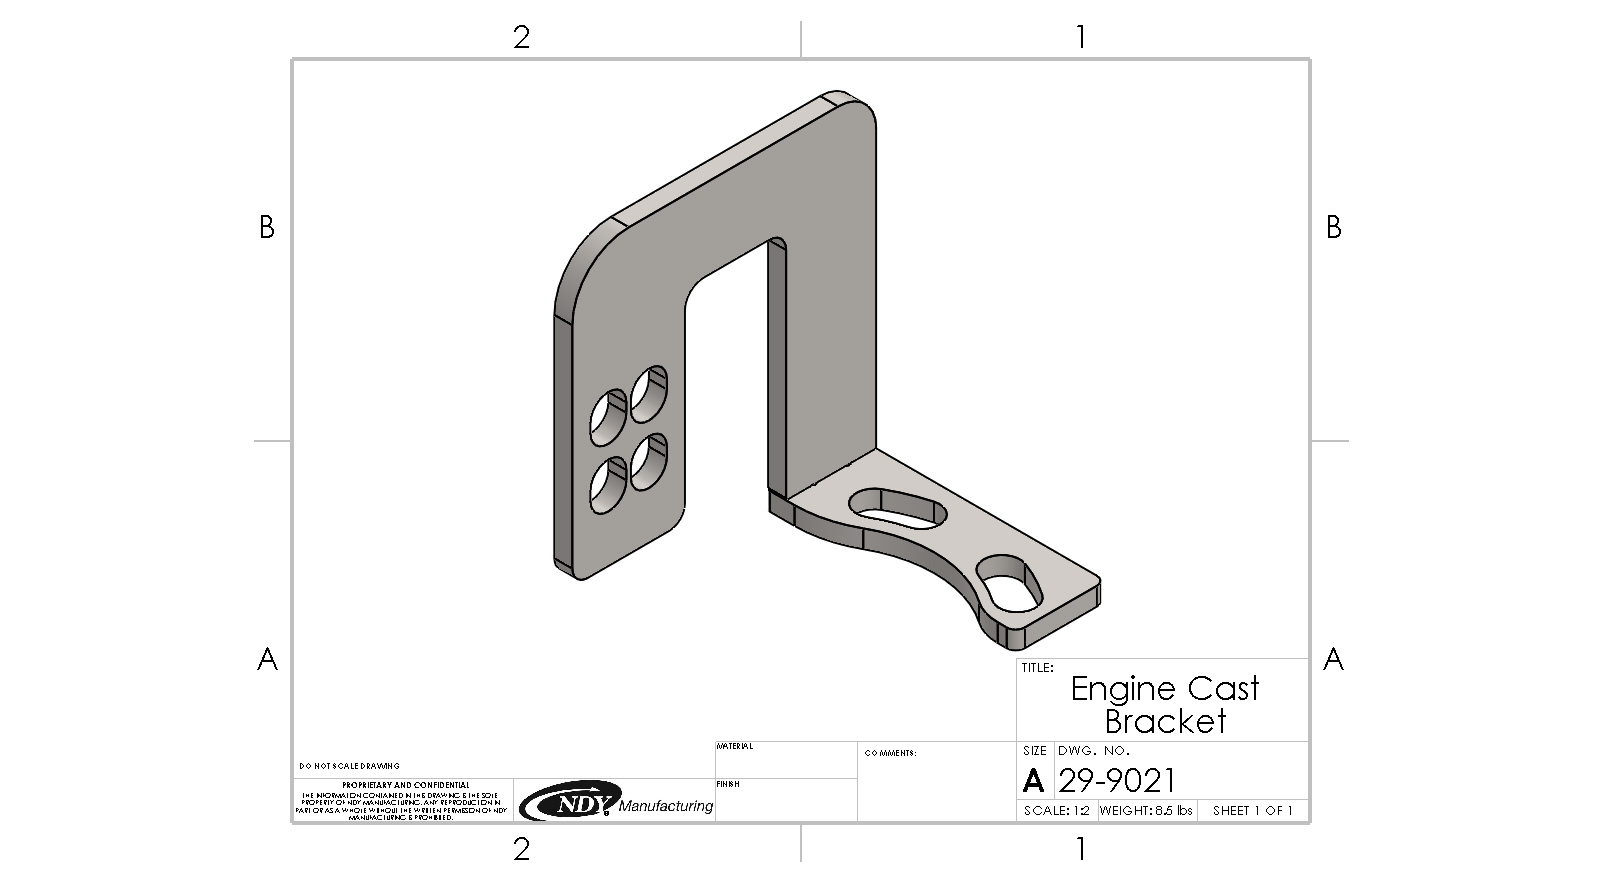 A drawing of the Rock Box Engine Cast Bracket - Left.